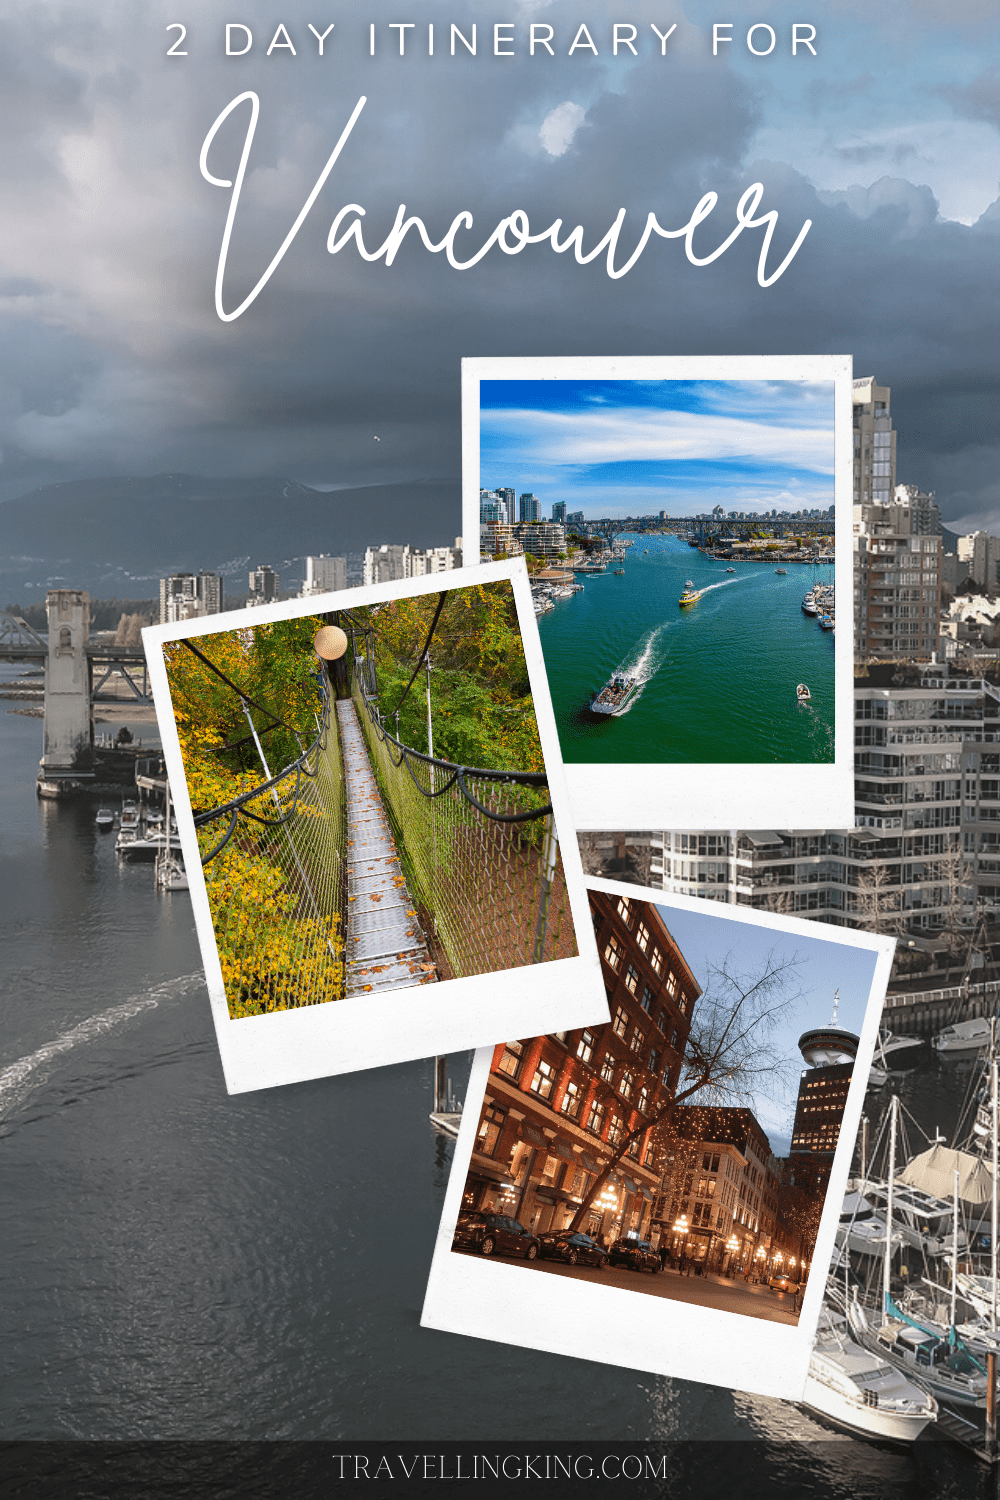 48 Hours in Vancouver - 2 Day Itinerary